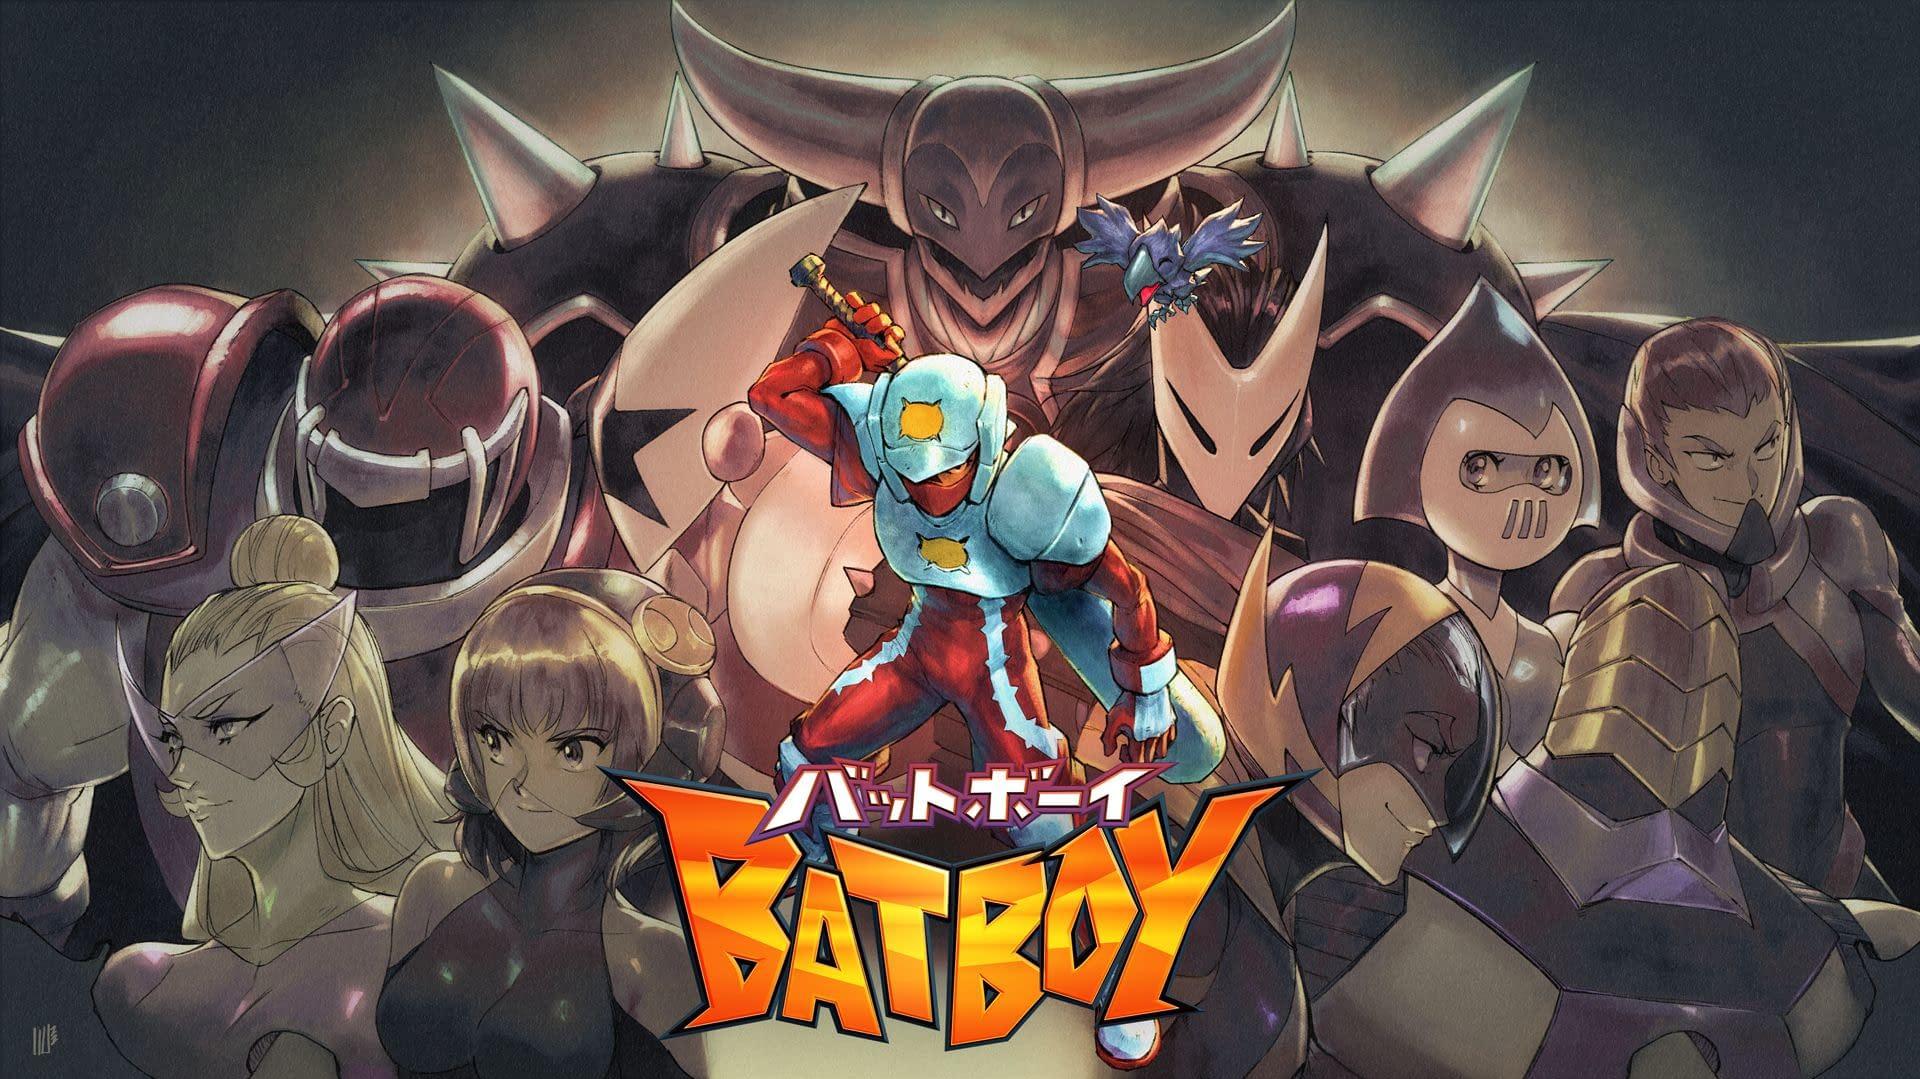 Bat Boy Announced For Release On PC Consoles This May